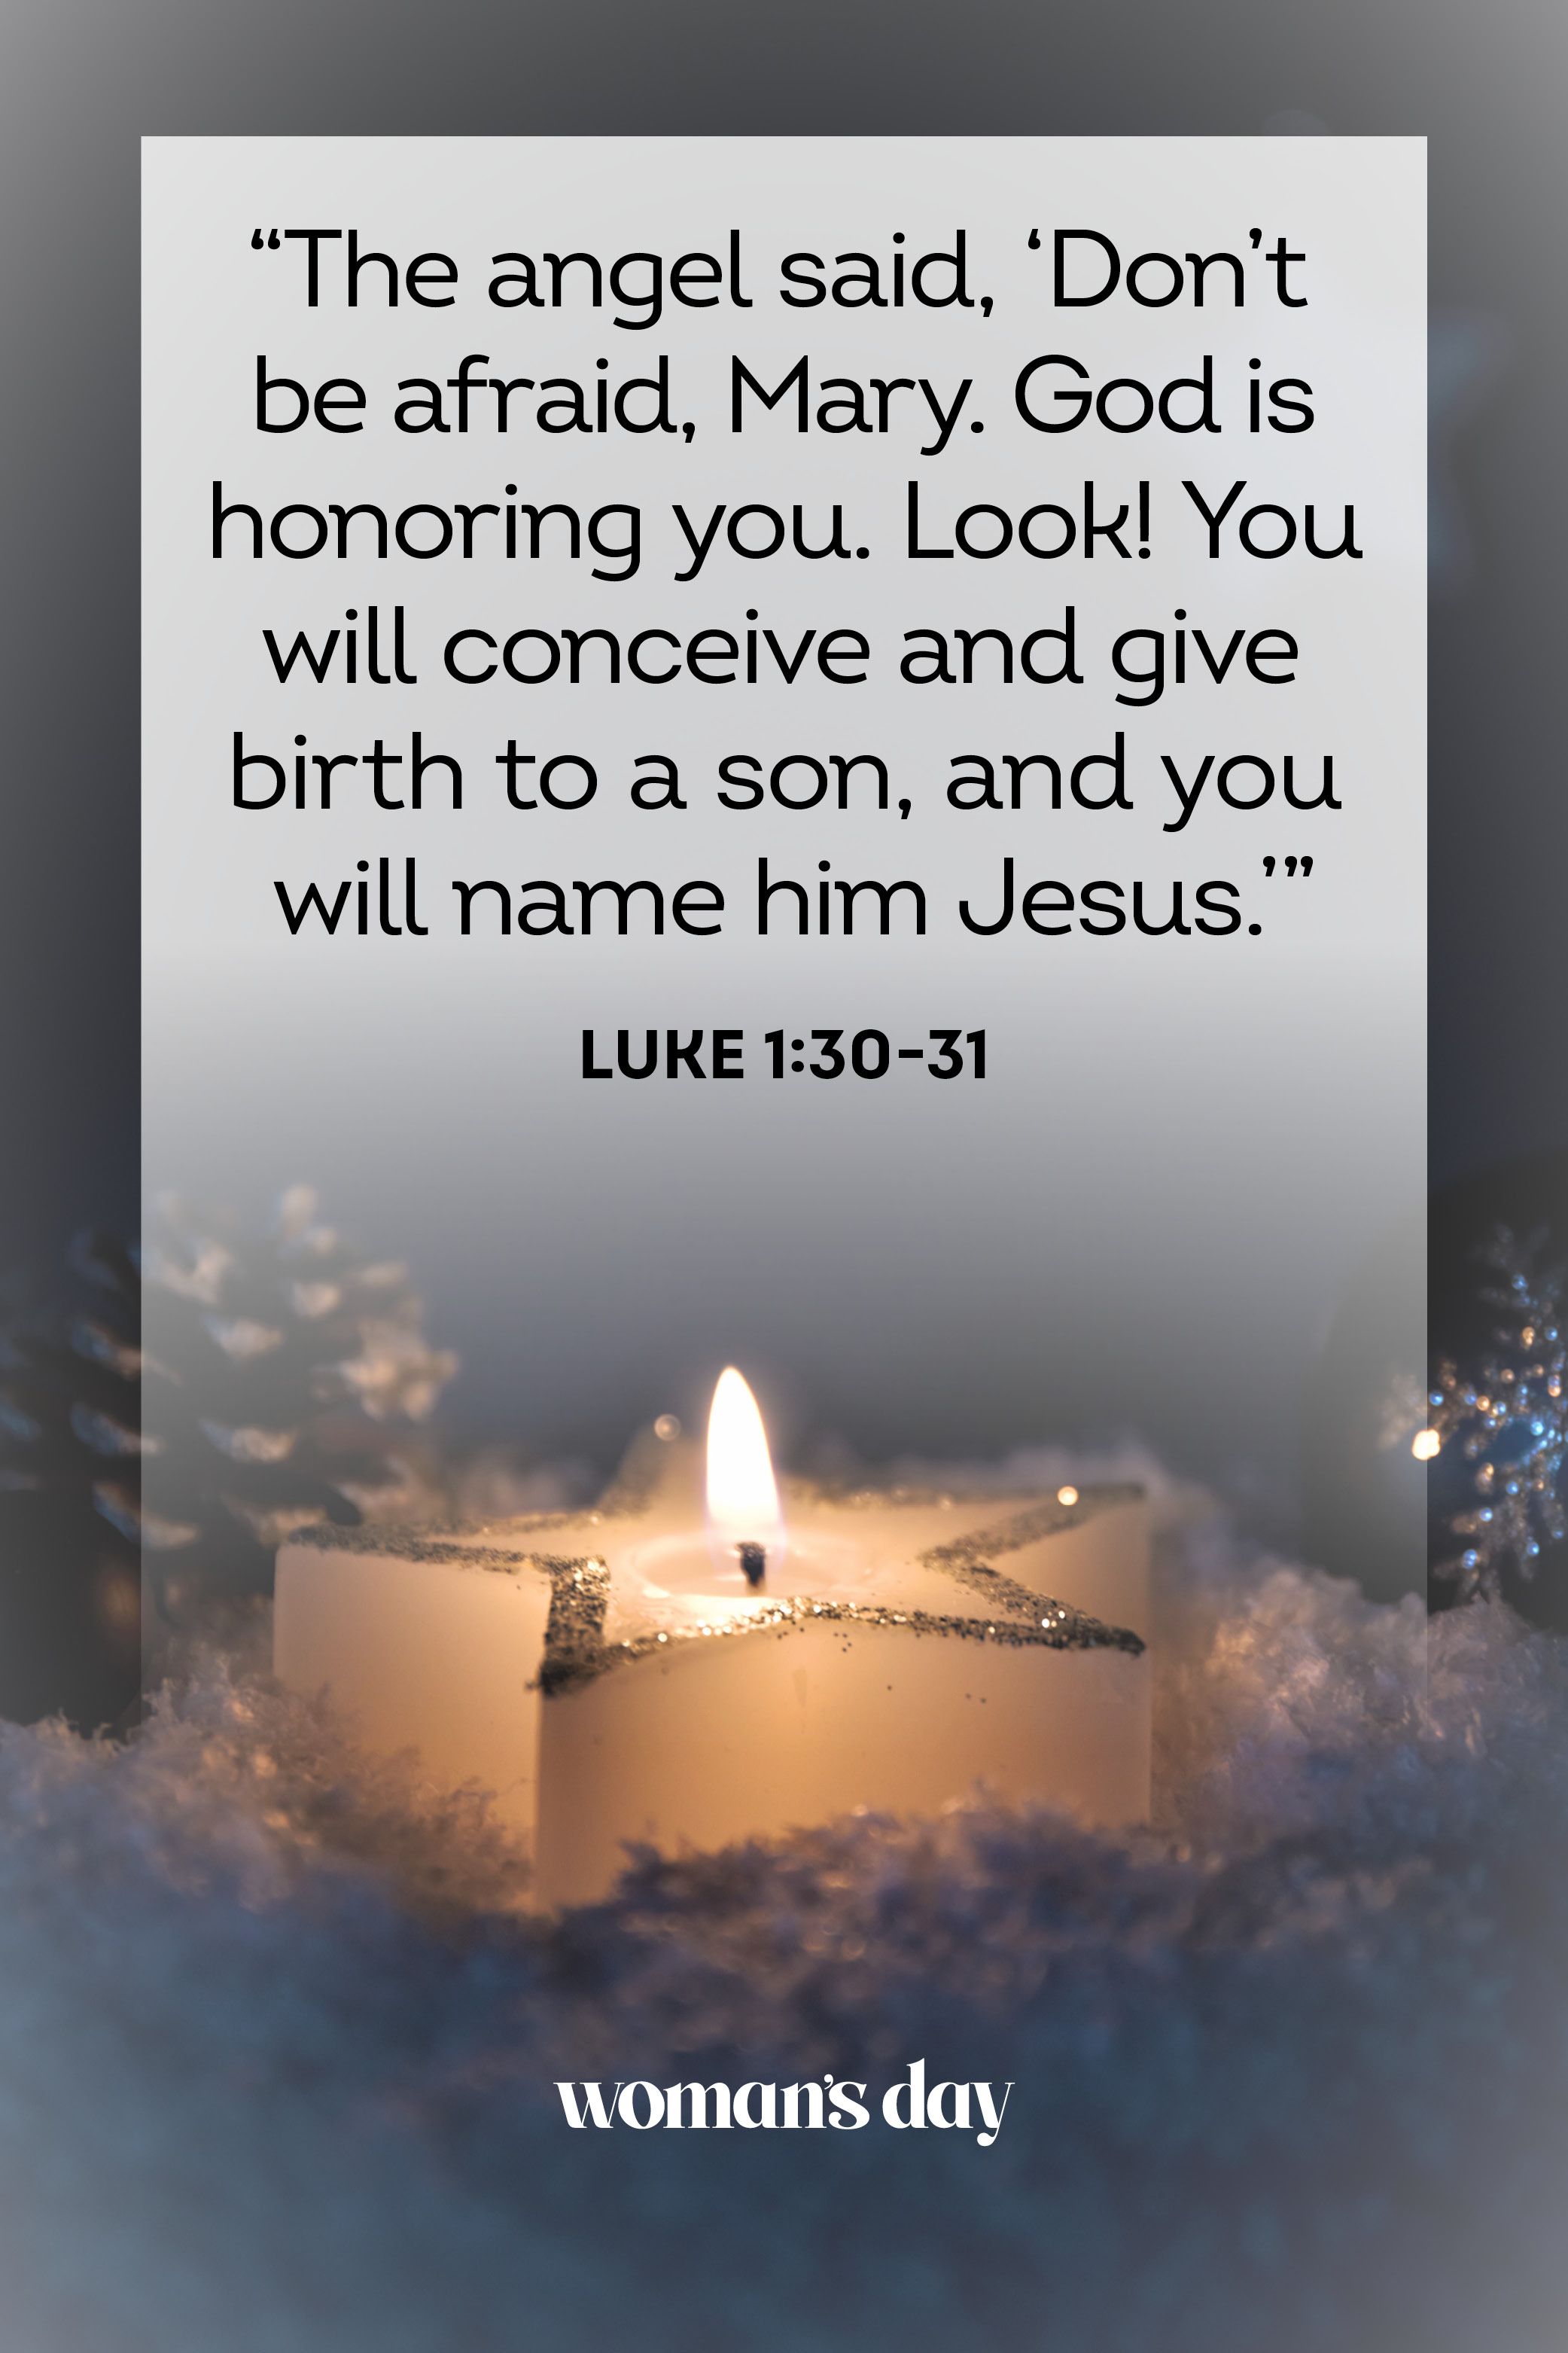 60 Best Christmas Bible Verses - The Meaning of Christmas Scripture